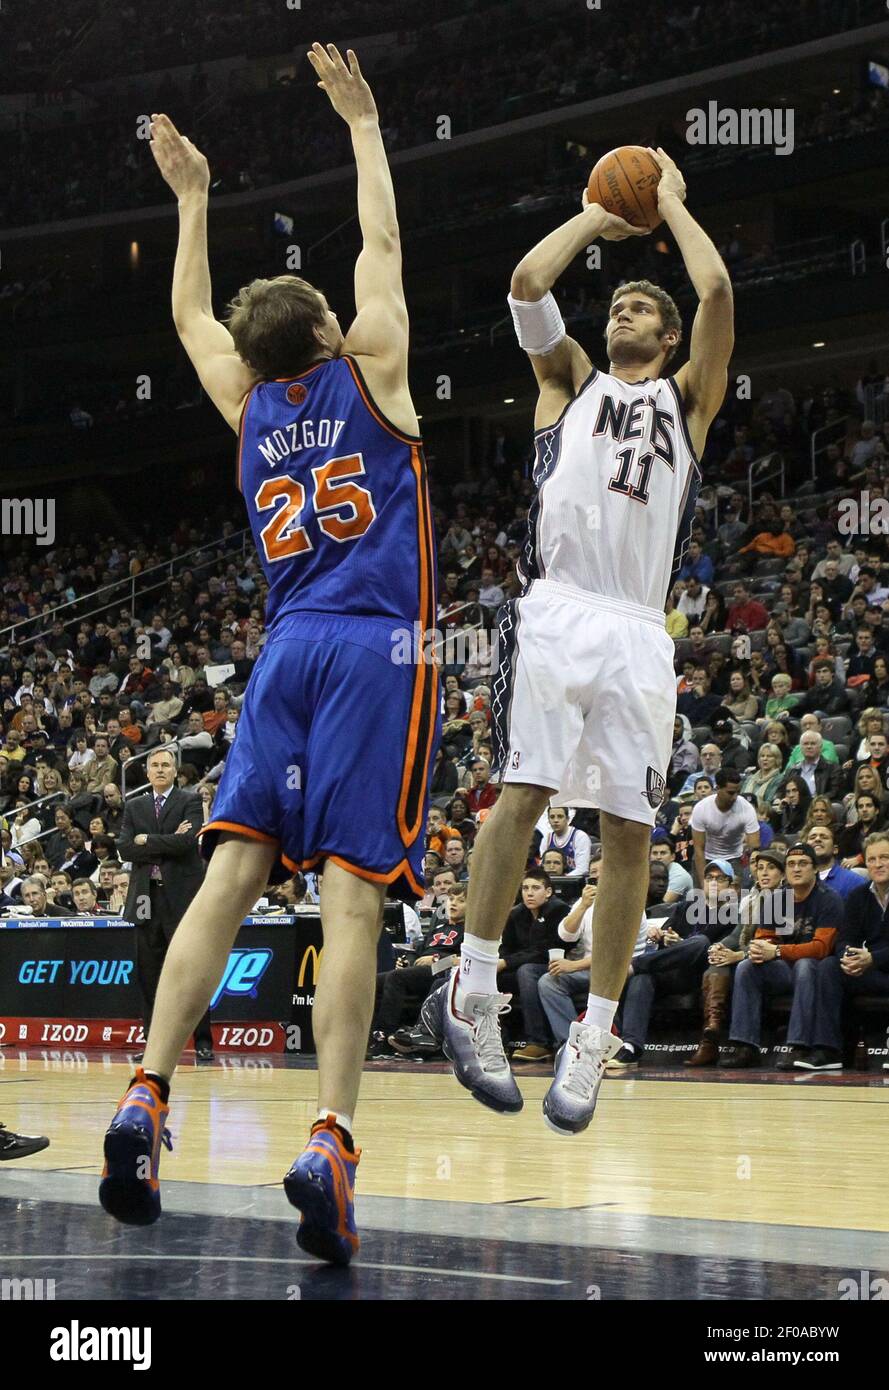 Brook Lopez (11) of the New Jersey Nets shoots against Timofey Mozgov (25)  of the New York Knicks at the Prudential Center in Newark, New Jersey, on  Saturday, February 12, 2011. The